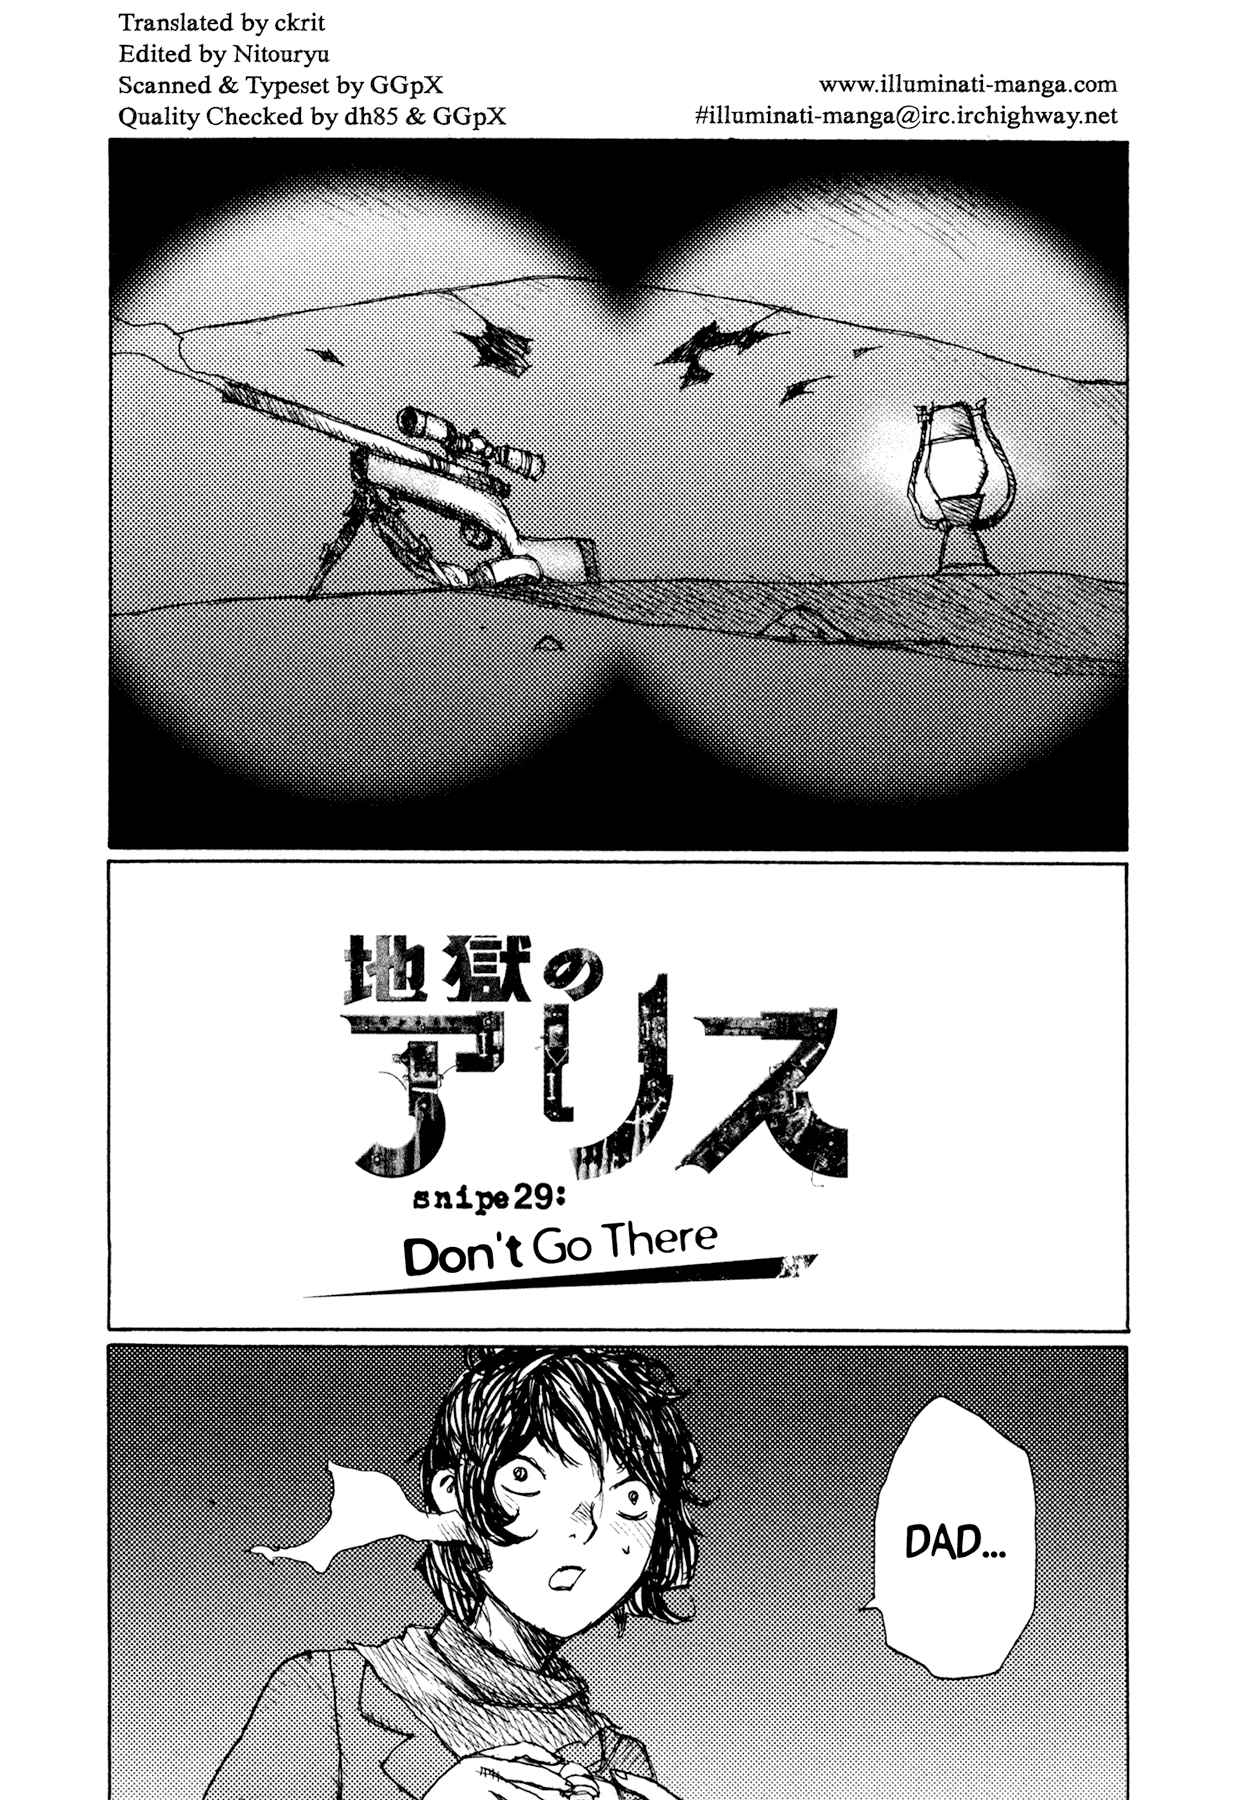 Alice from Hell Vol. 4 Ch. 29 Don't Go There